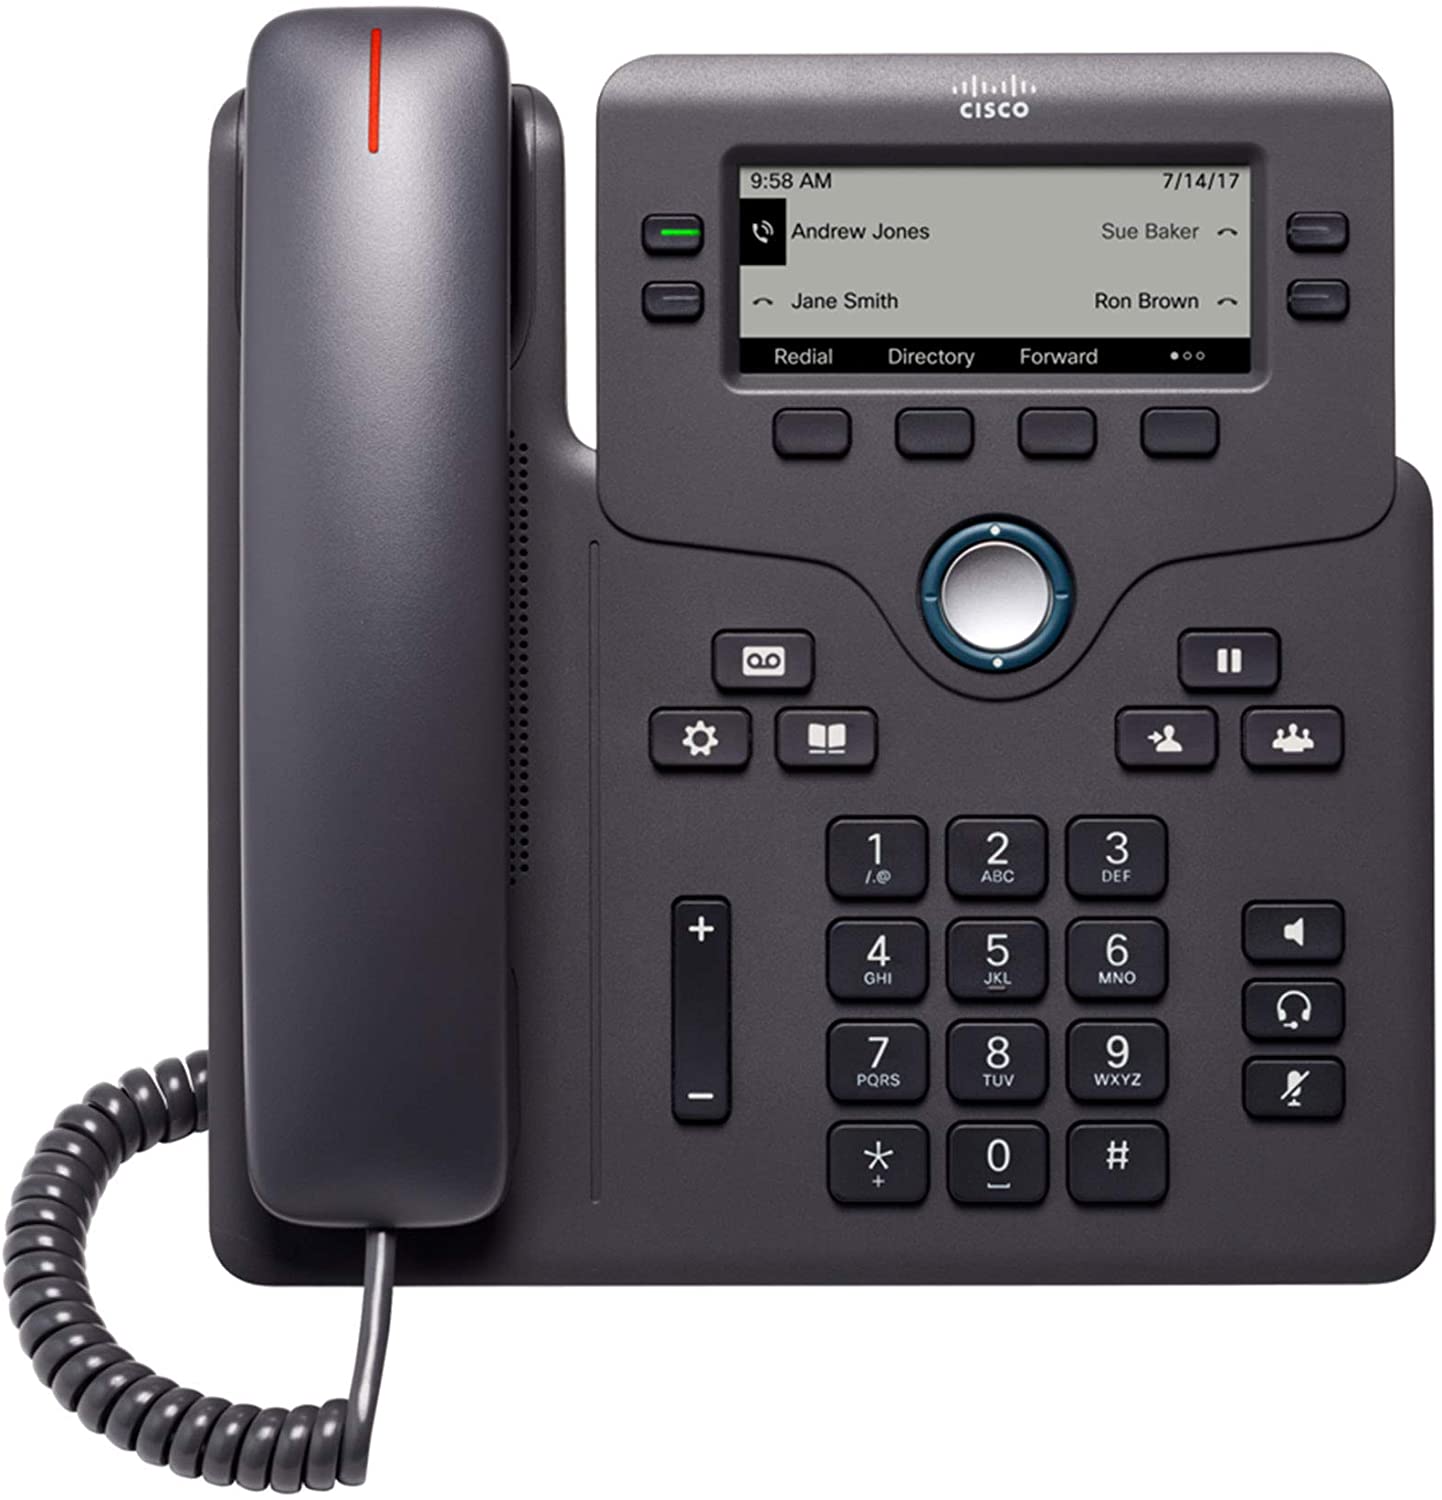 Cisco 6841 IP Phone with 3rd Party Call Control No Power Included (CP-6841-3PCC-K9) Refurb